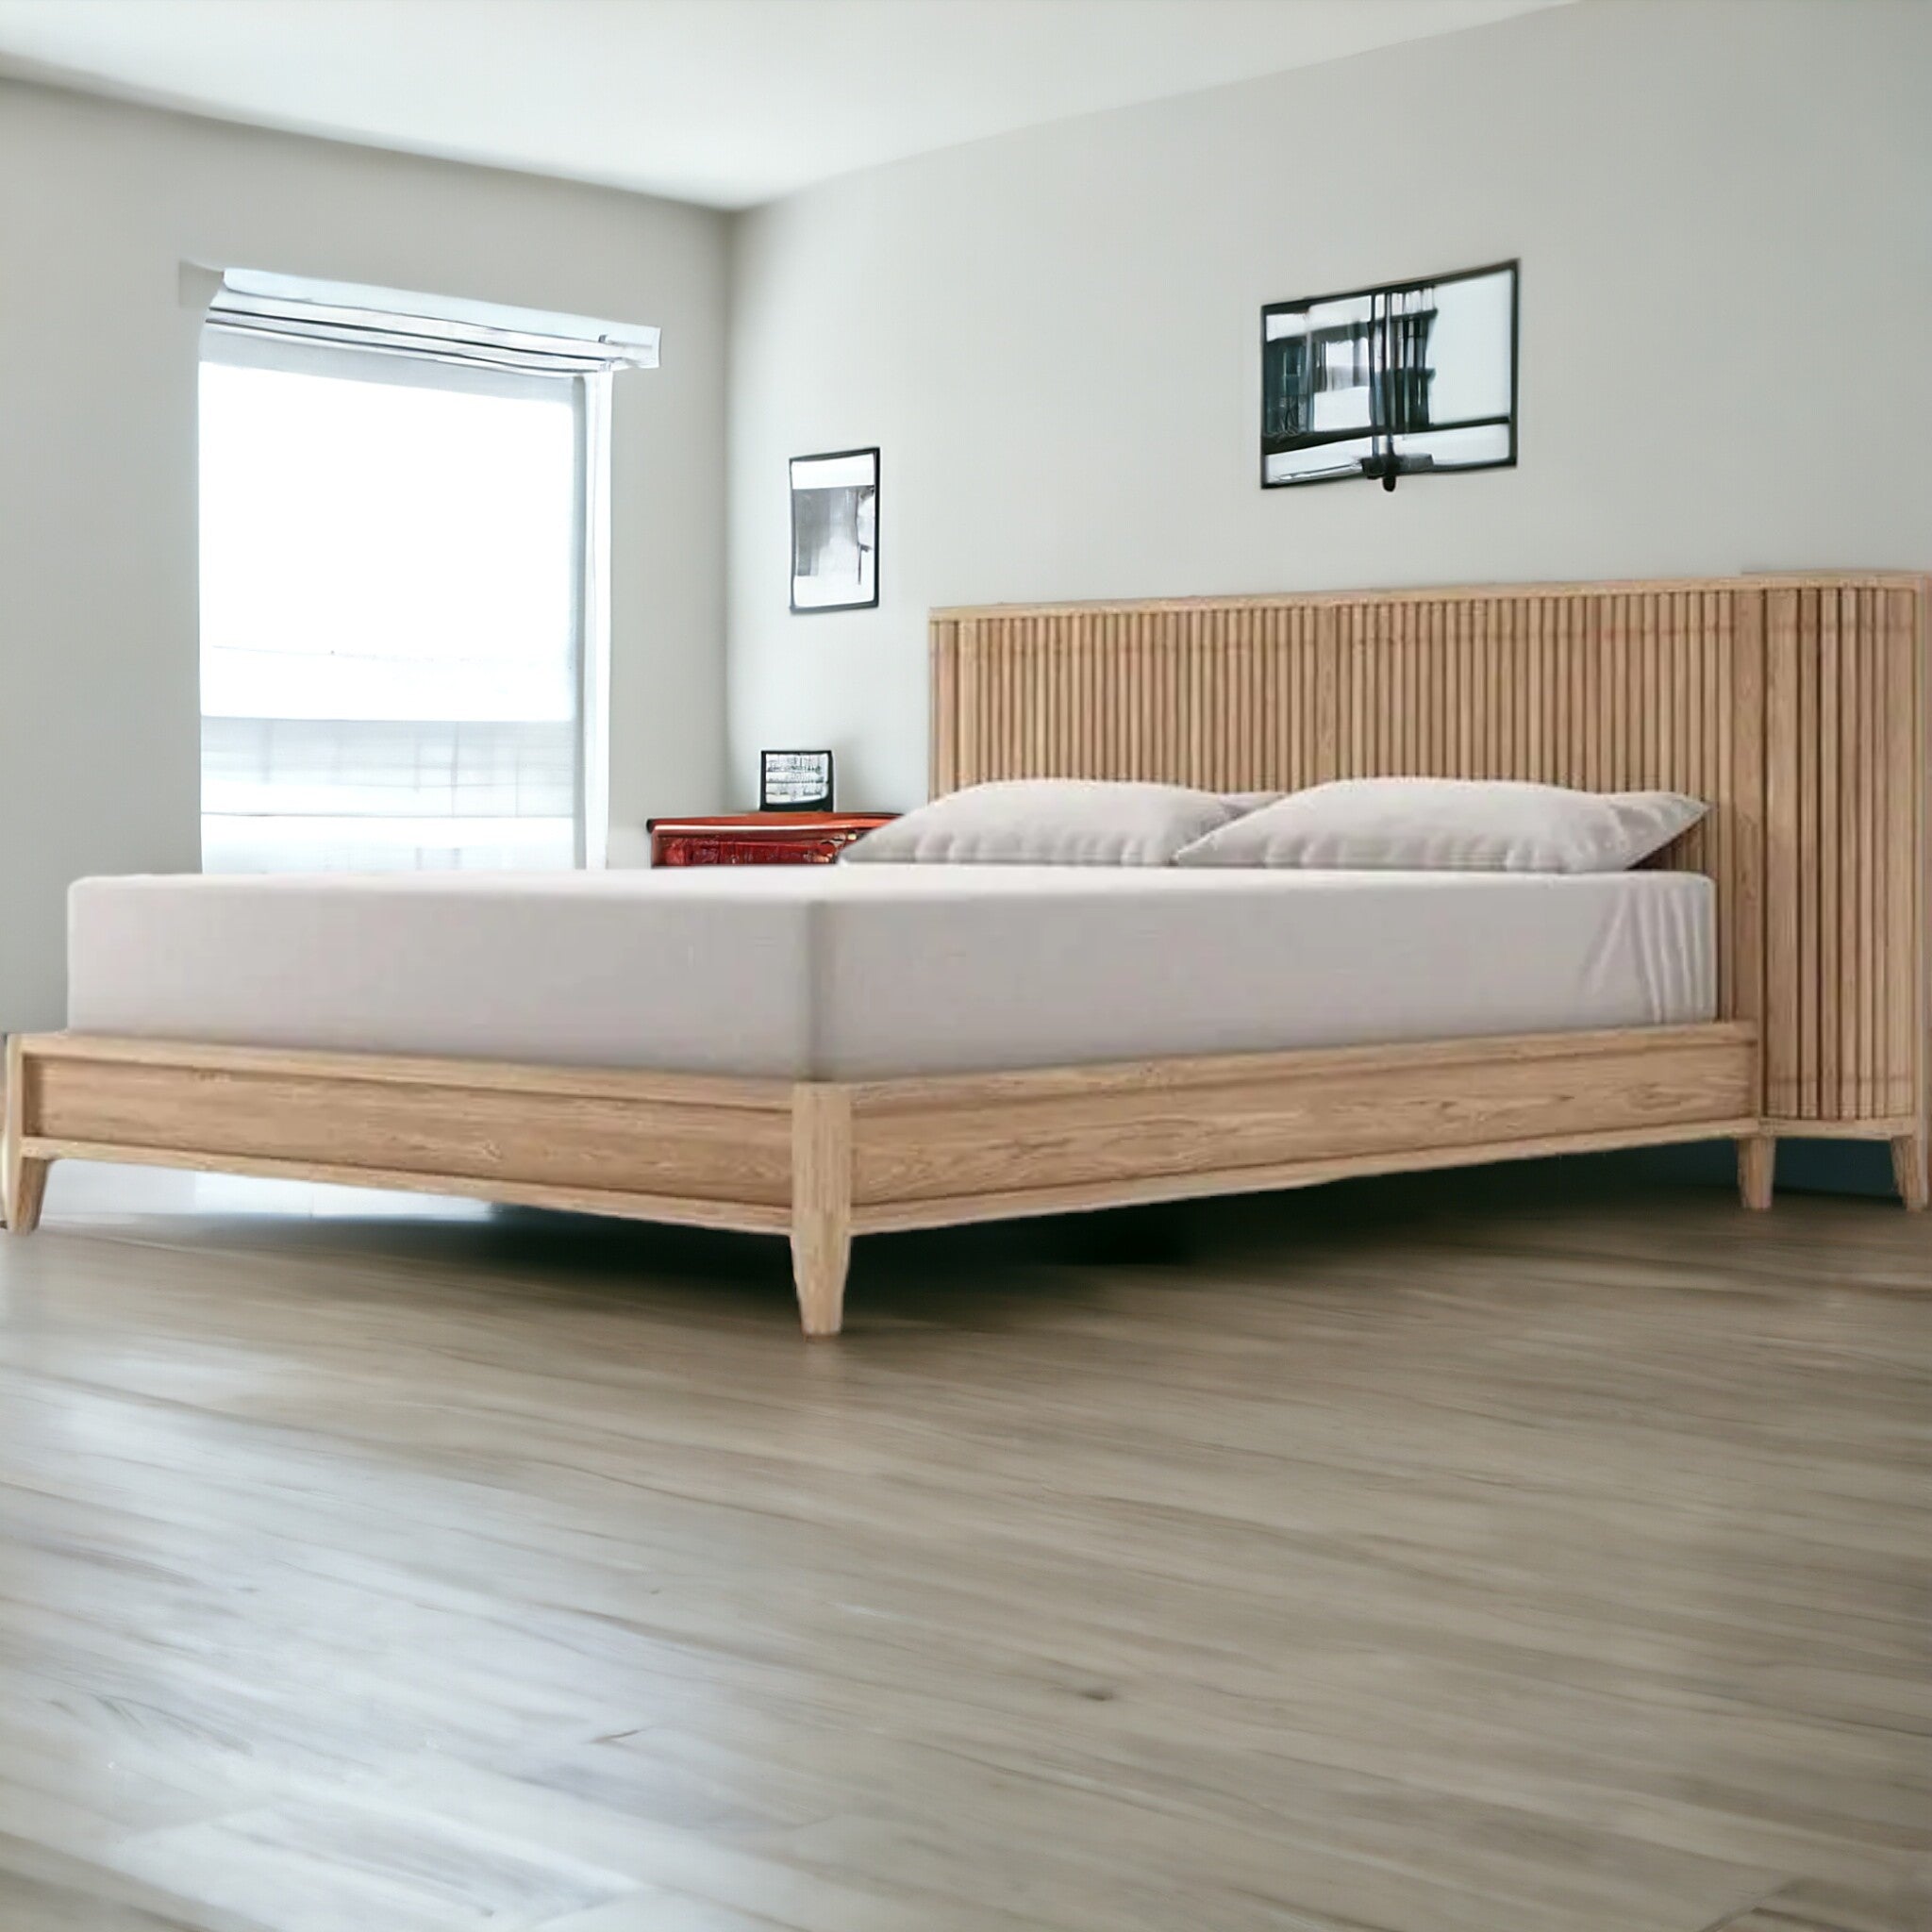 Luxurious Teak King Bed with Fluted Headboard and Built-in Bedside Tables